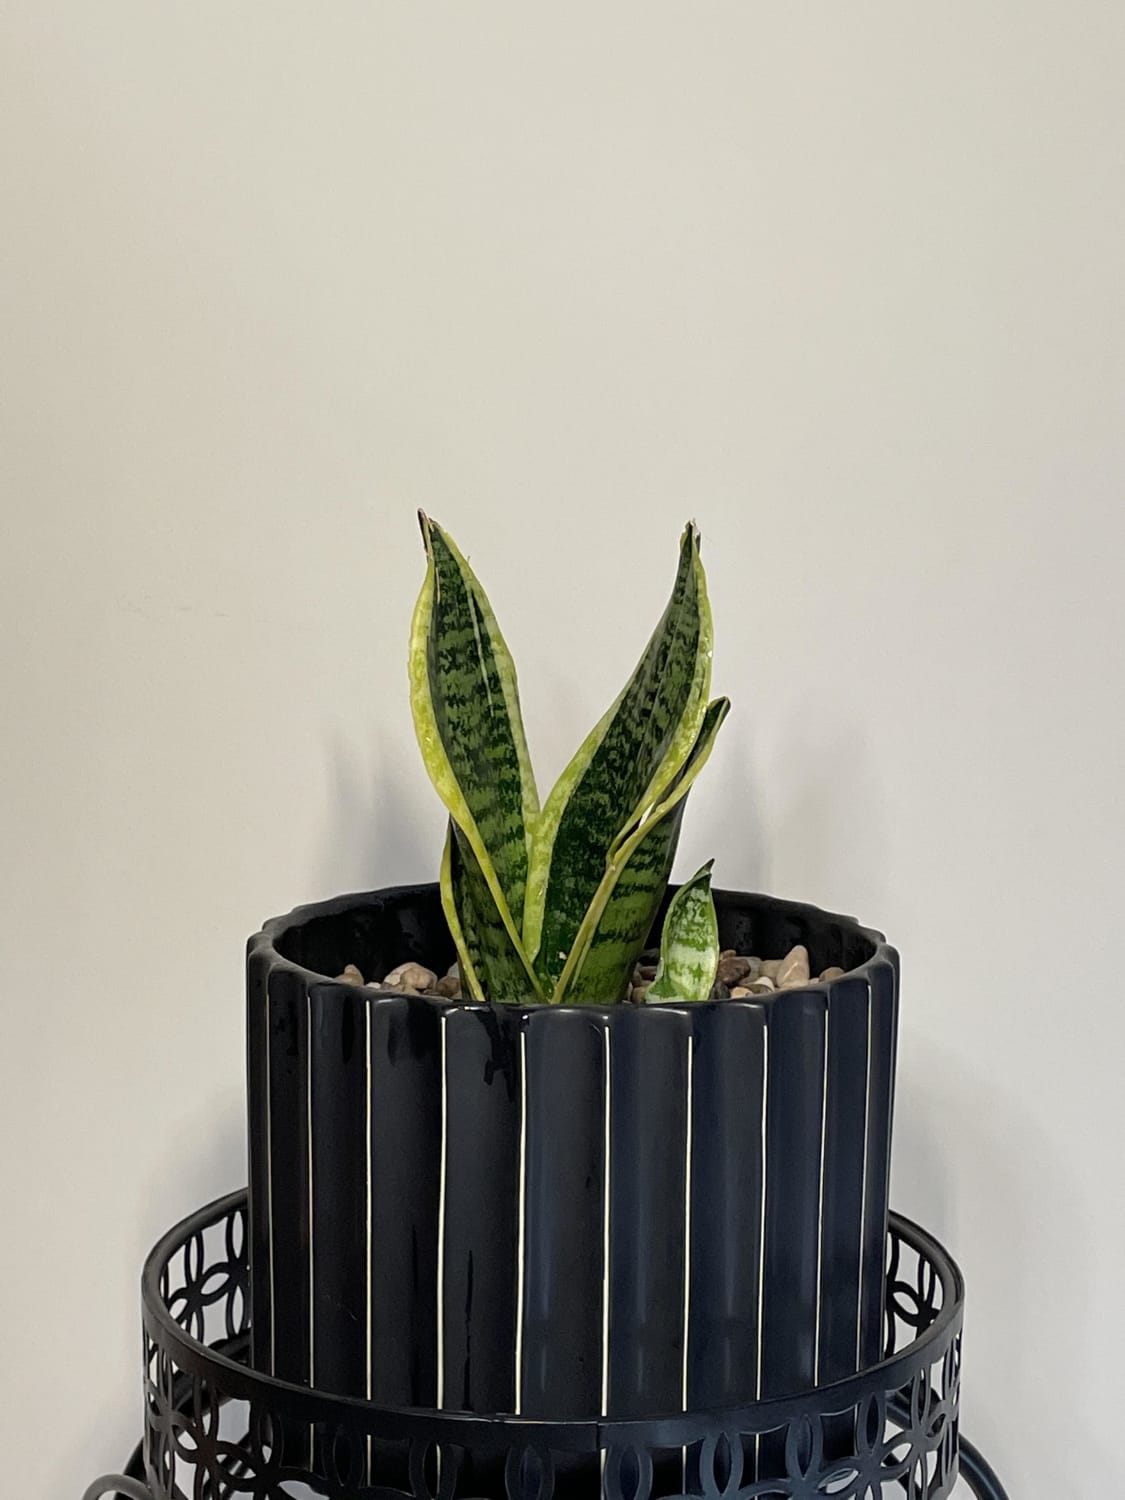 My snake plant (mother-in-laws tongue) had a baby so I thought they deserved a newborn photoshoot 🥰